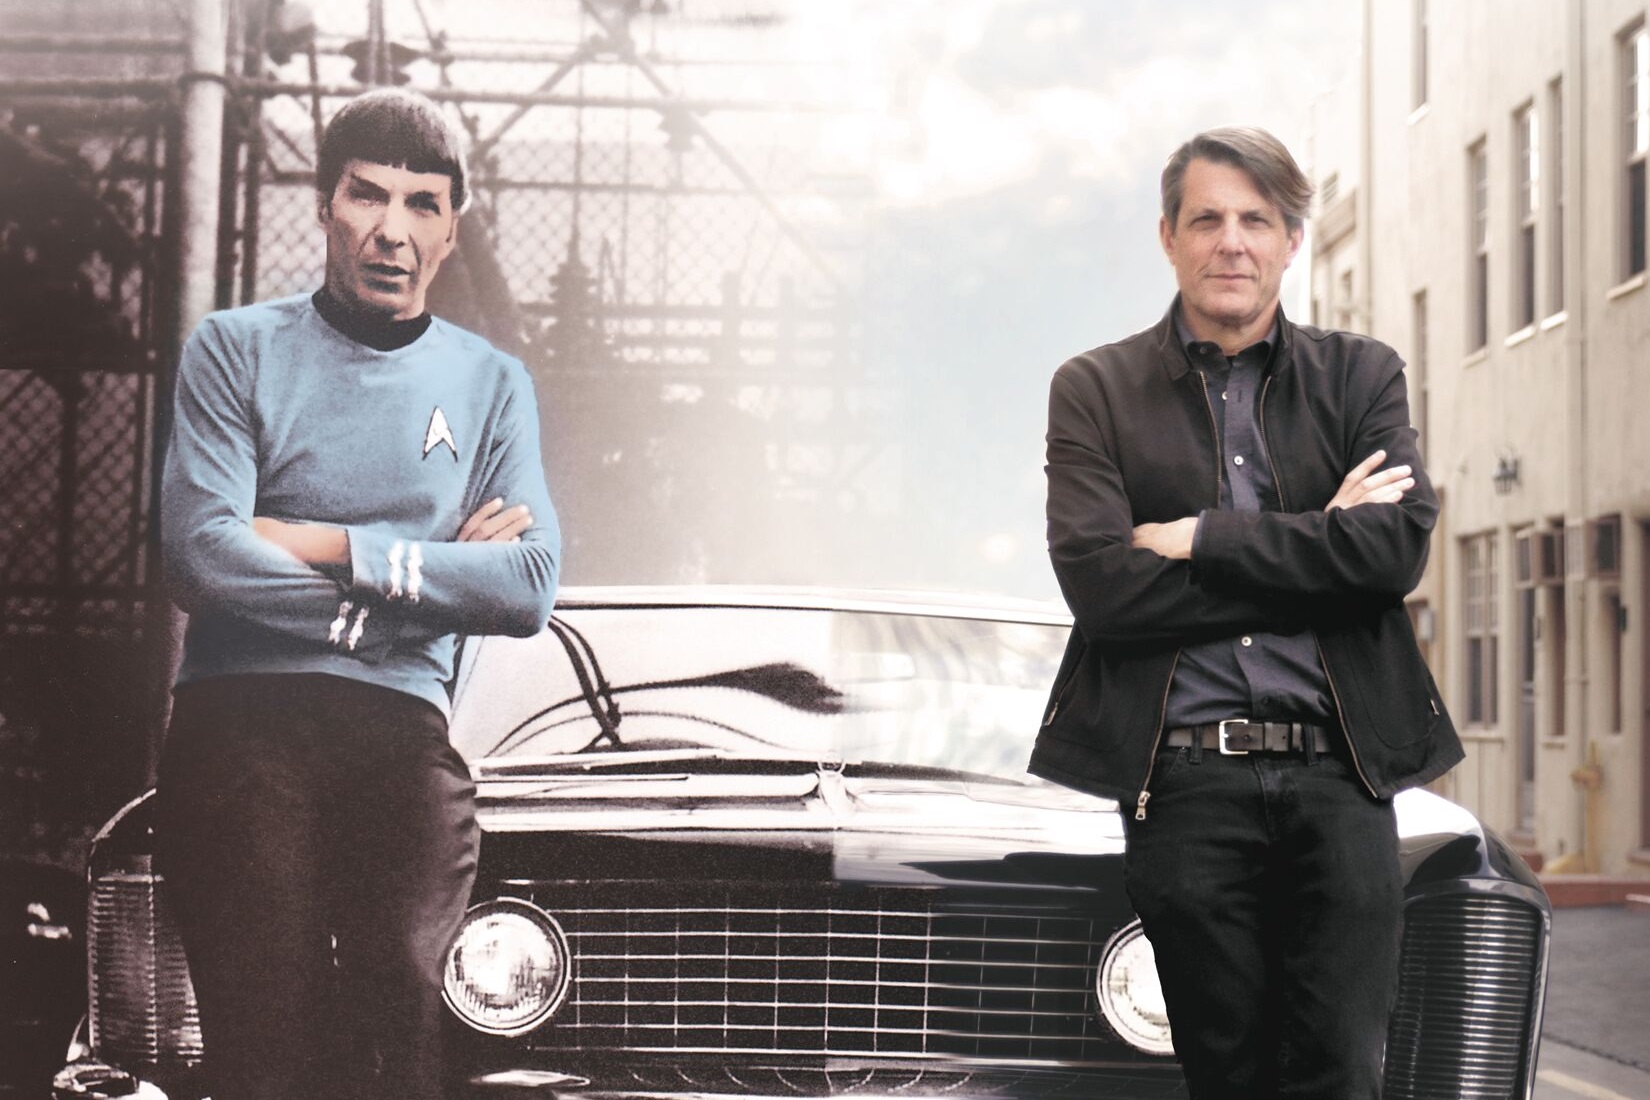 For the Love of Spock': New Film Honors Leonard Nimoy's Legacy | Space